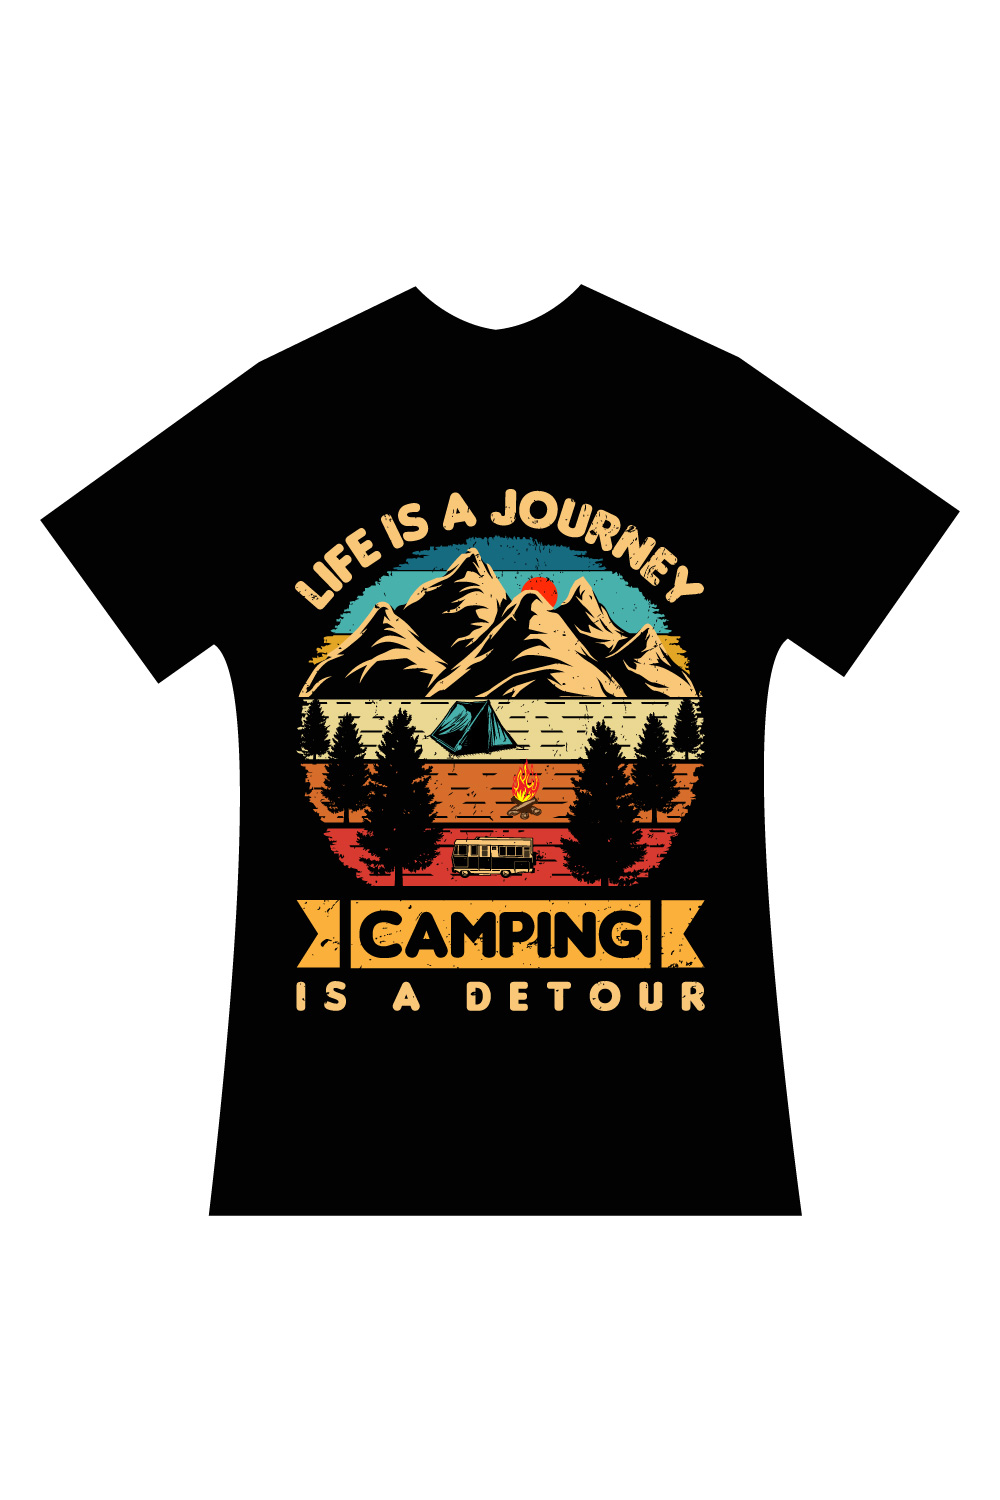 life is a journey camping is a detour Camping t shirt Design pinterest preview image.